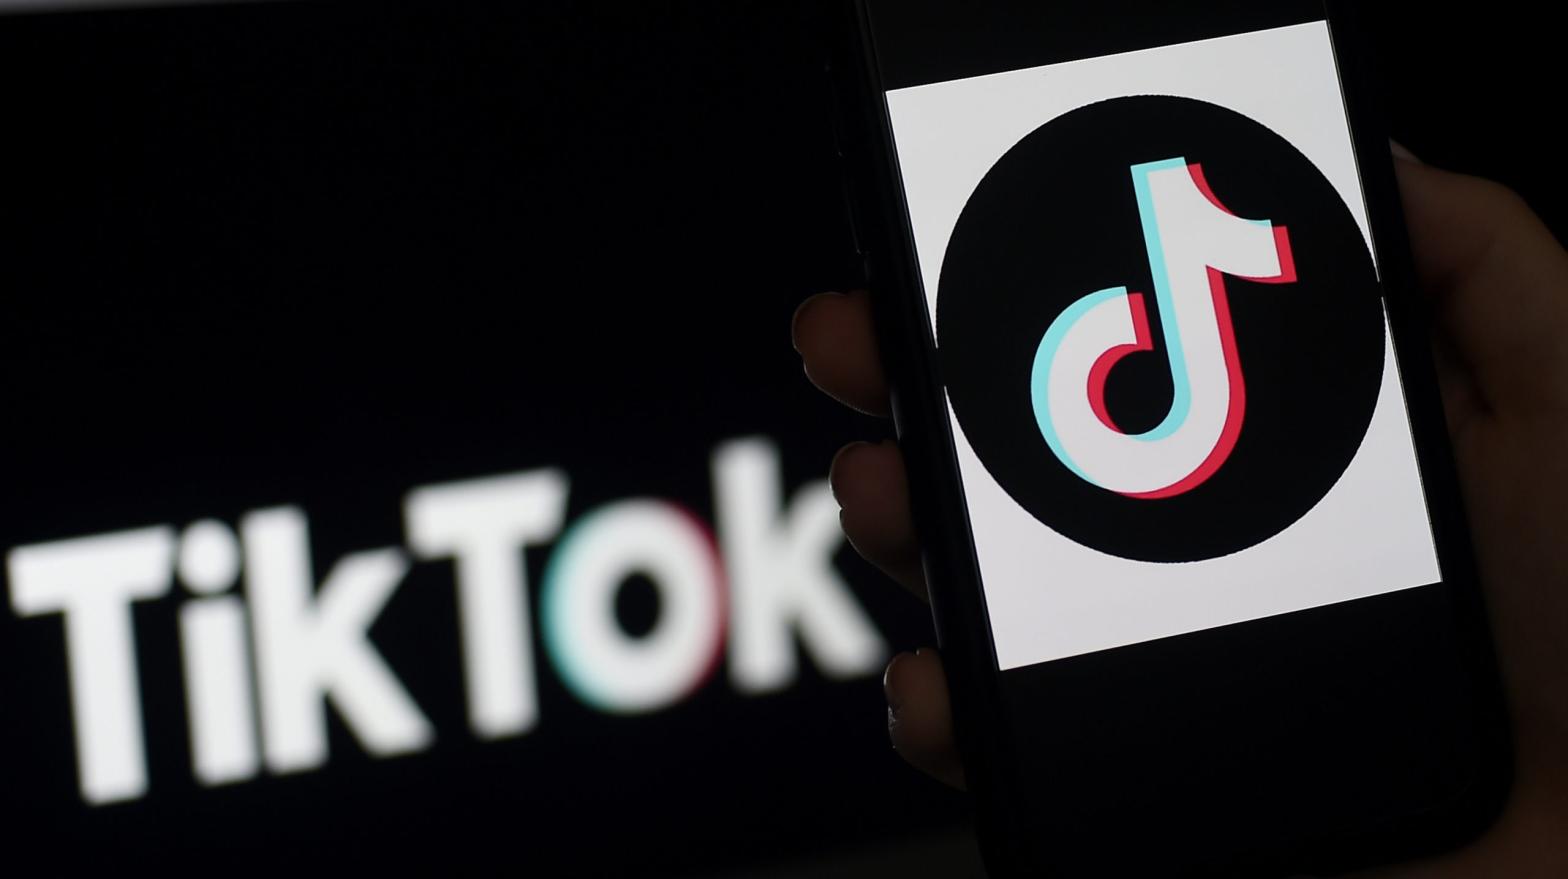 TikTok is displayed on the screen of an iPhone on April 13, 2020, in Arlington, Virginia. (Photo: Olivier Douliery, Getty Images)